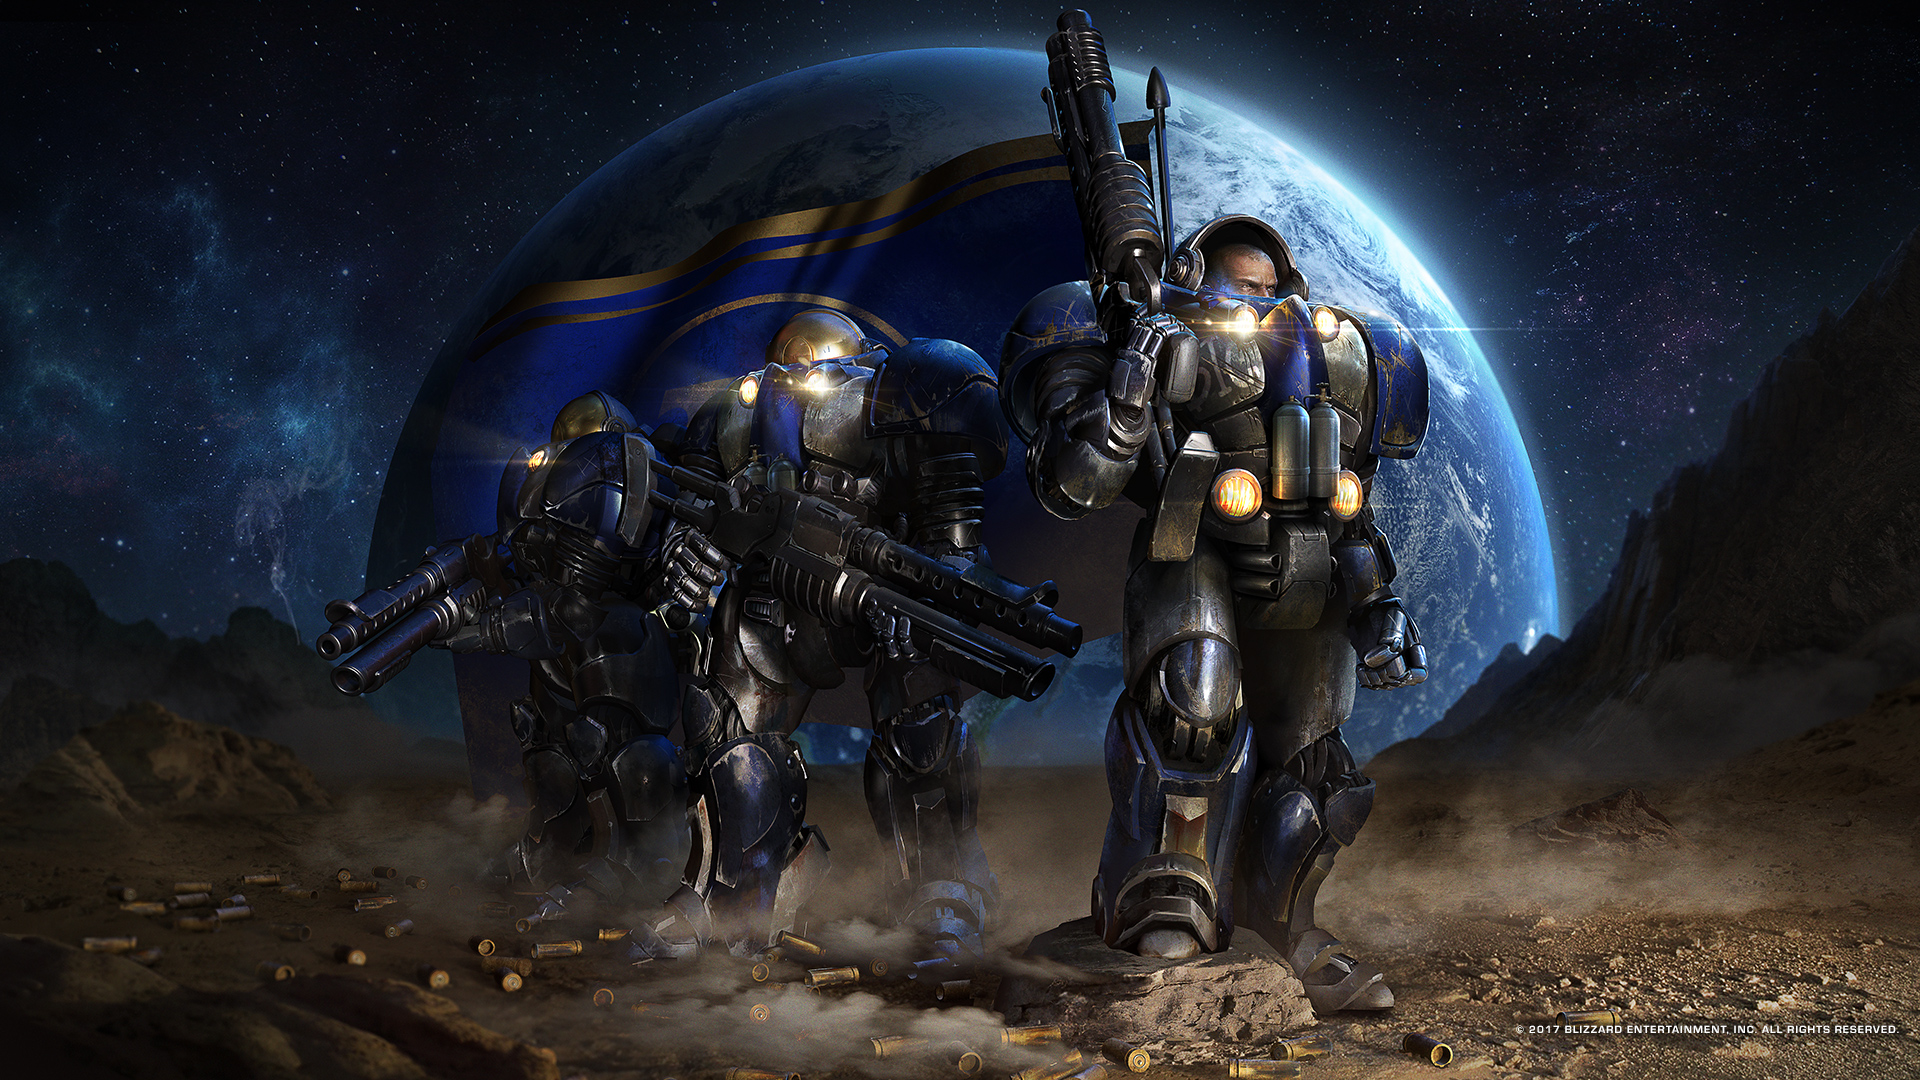 General 1920x1080 StarCraft PC gaming Terrans science fiction weapon soldier armor shaved head planet stars starscape flag ammunition shell casing exosuit futuristic armor power armor Exoskeleton marines spacesuit power suit mechs video games space video game characters